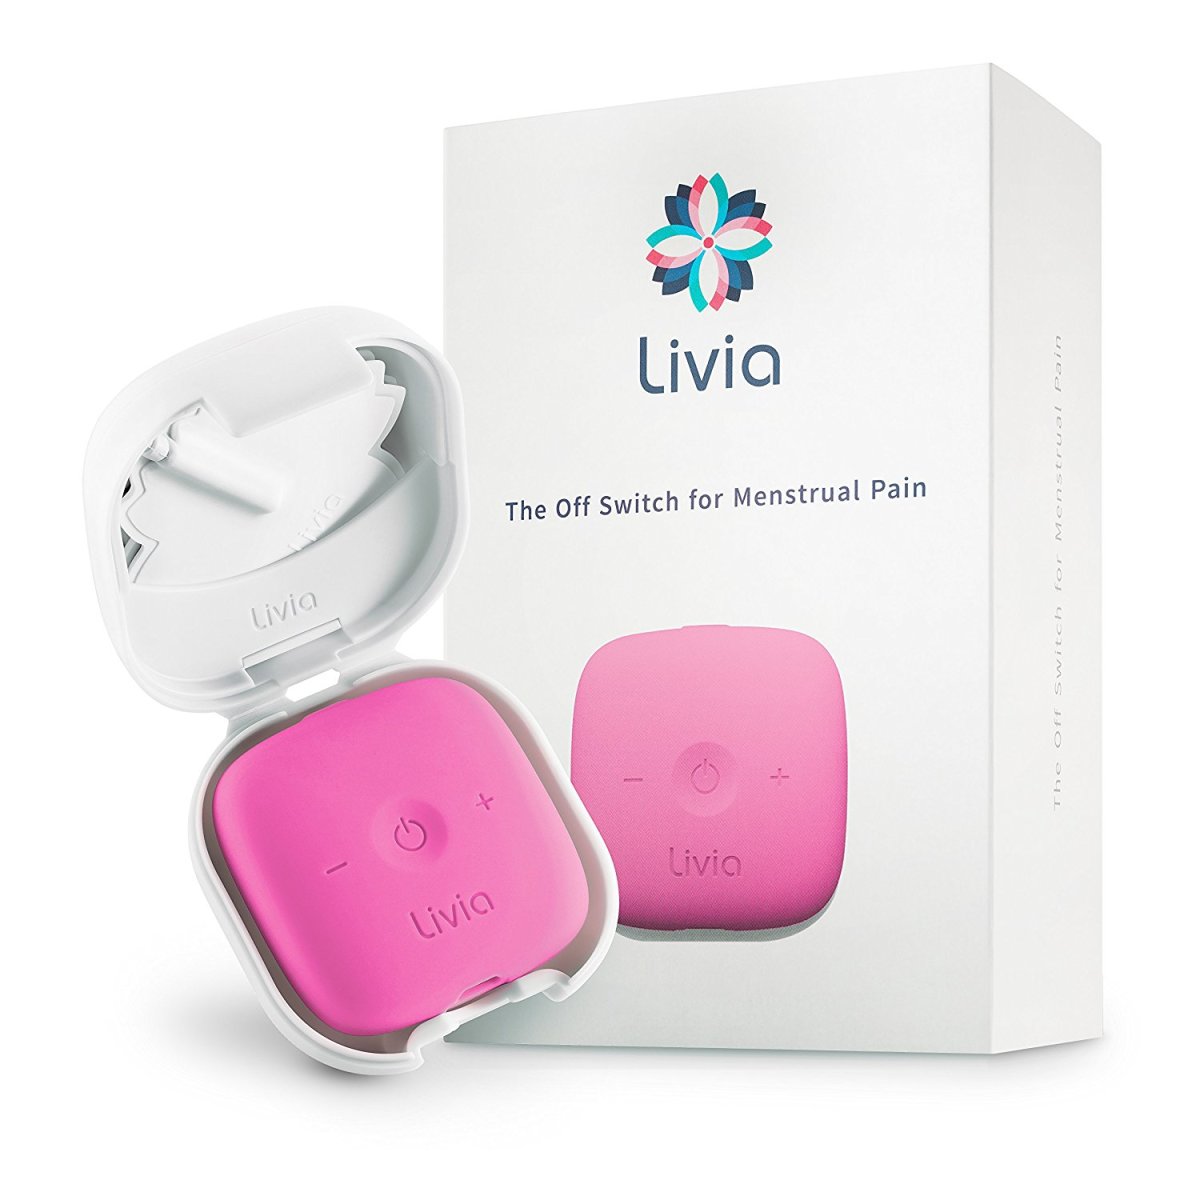 Livia—"the off switch for menstrual pain"